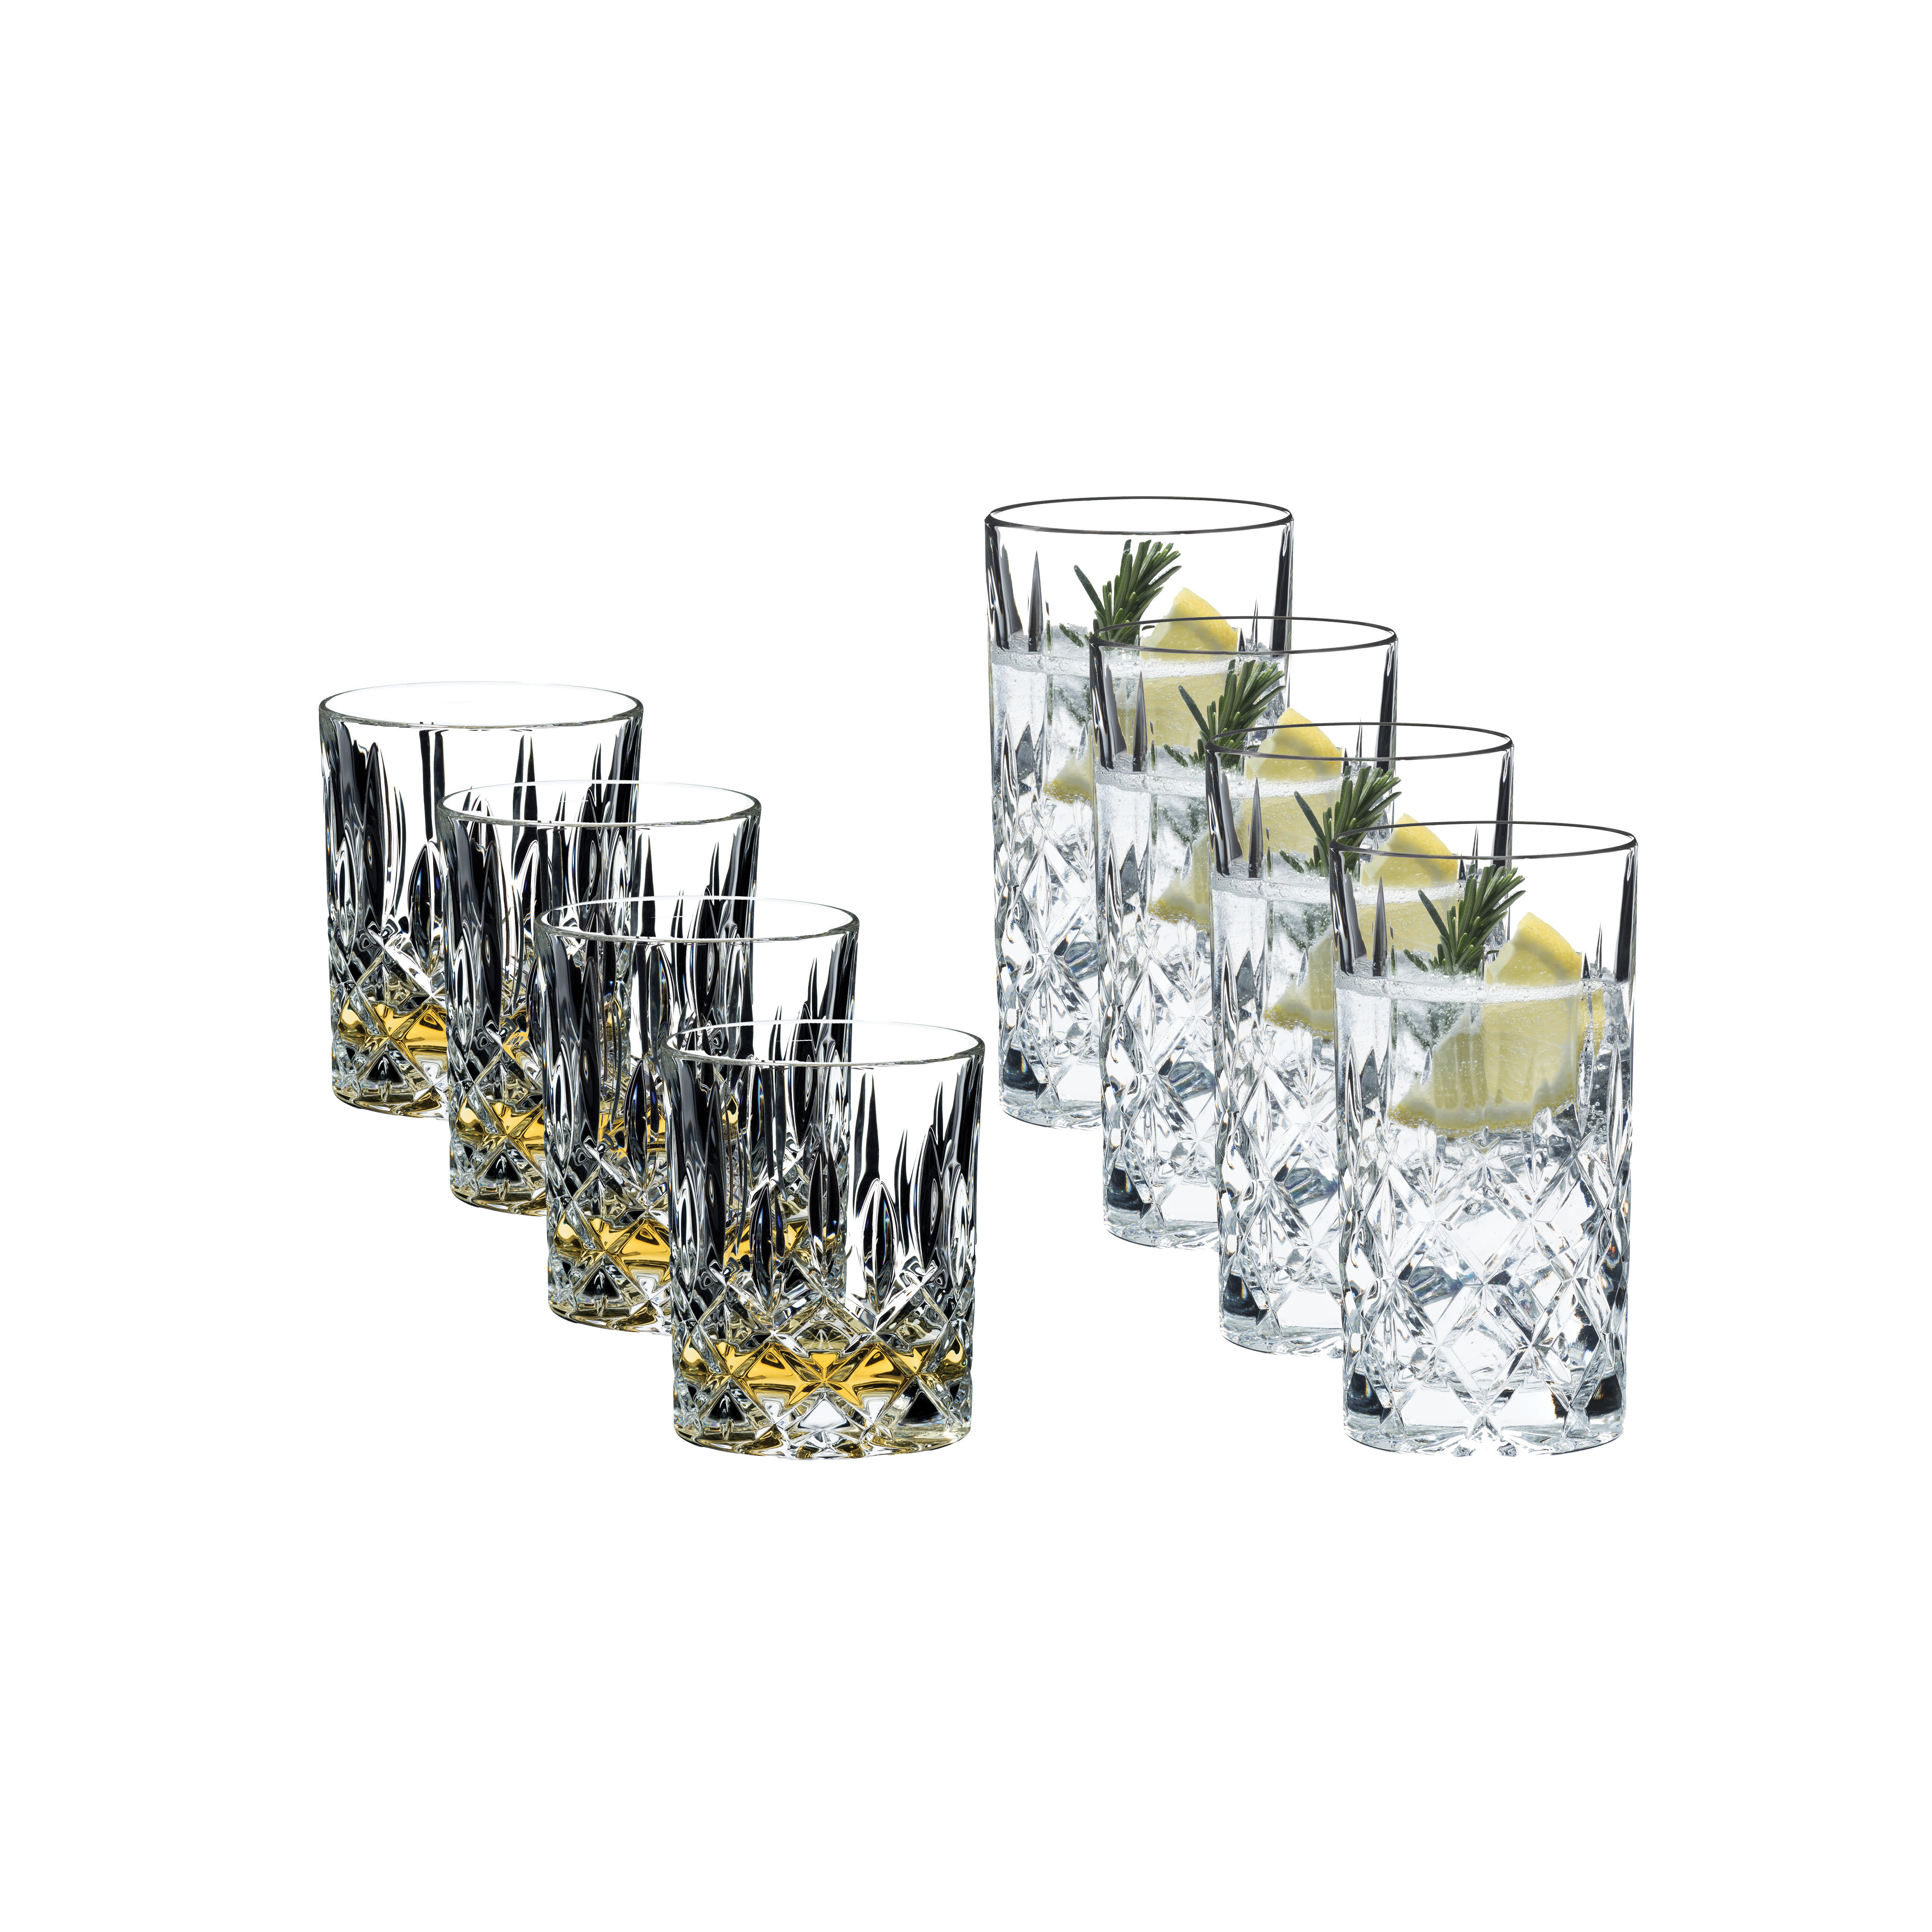 Barware Collections SP24  Pottery Barn, Barware Collections SP24